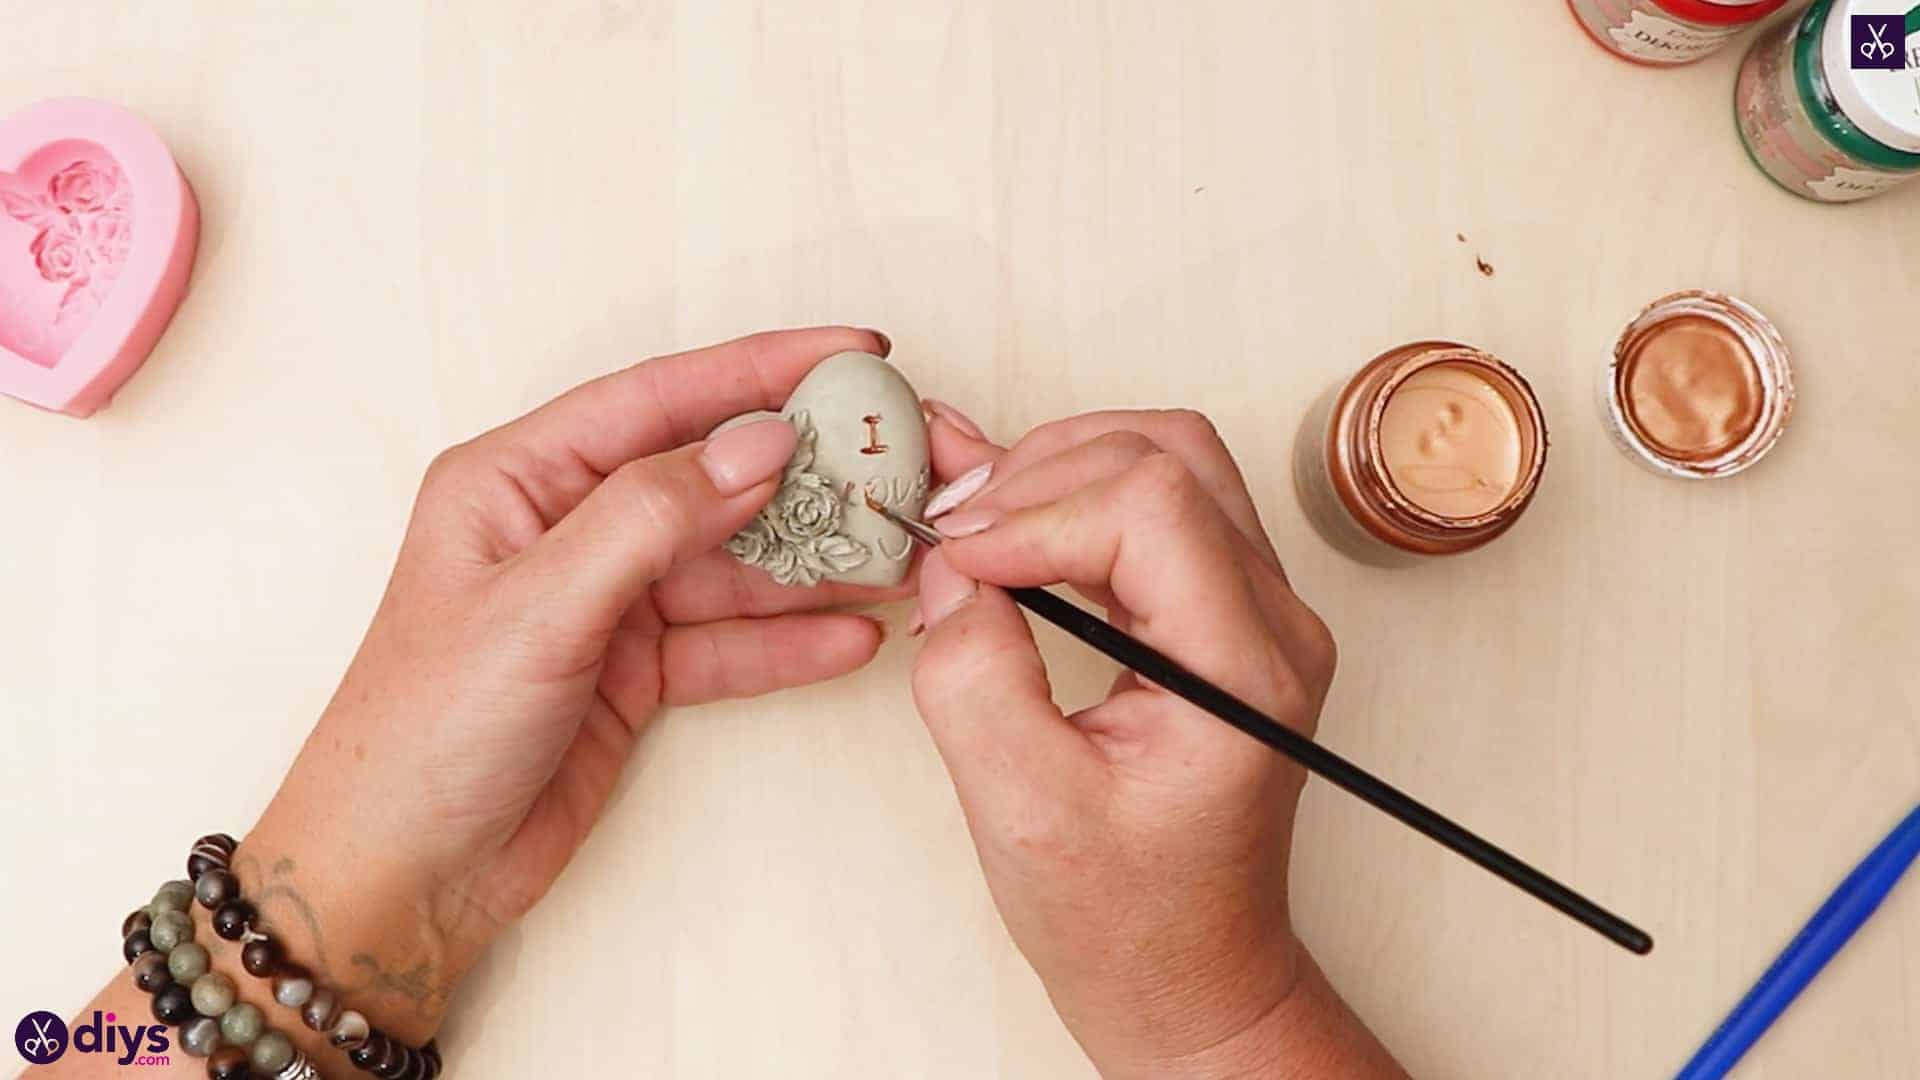 Diy concrete heart and roses paint